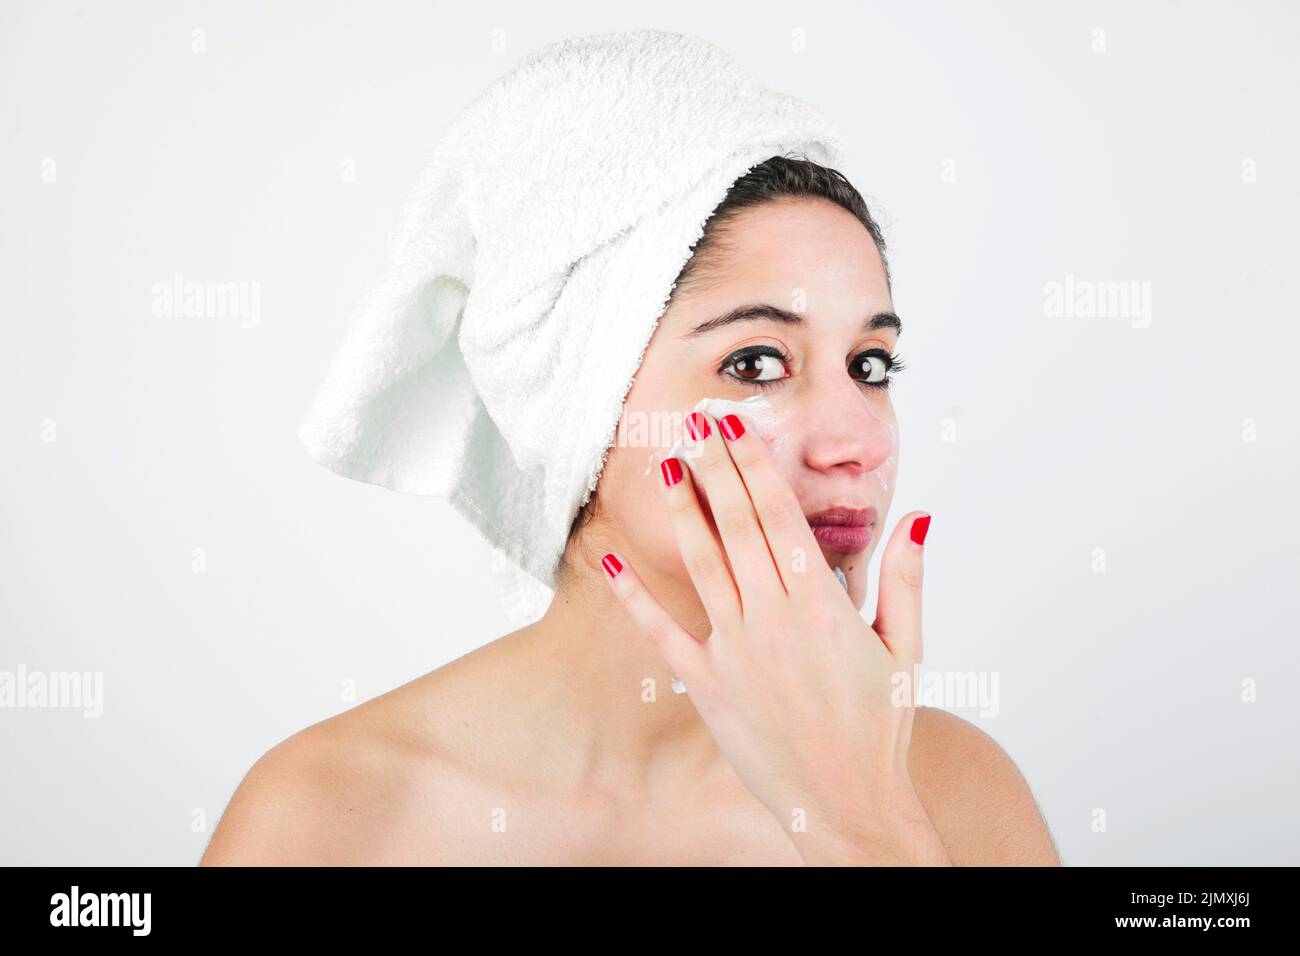 Young woman applying cream face with white towel her head Stock Photo